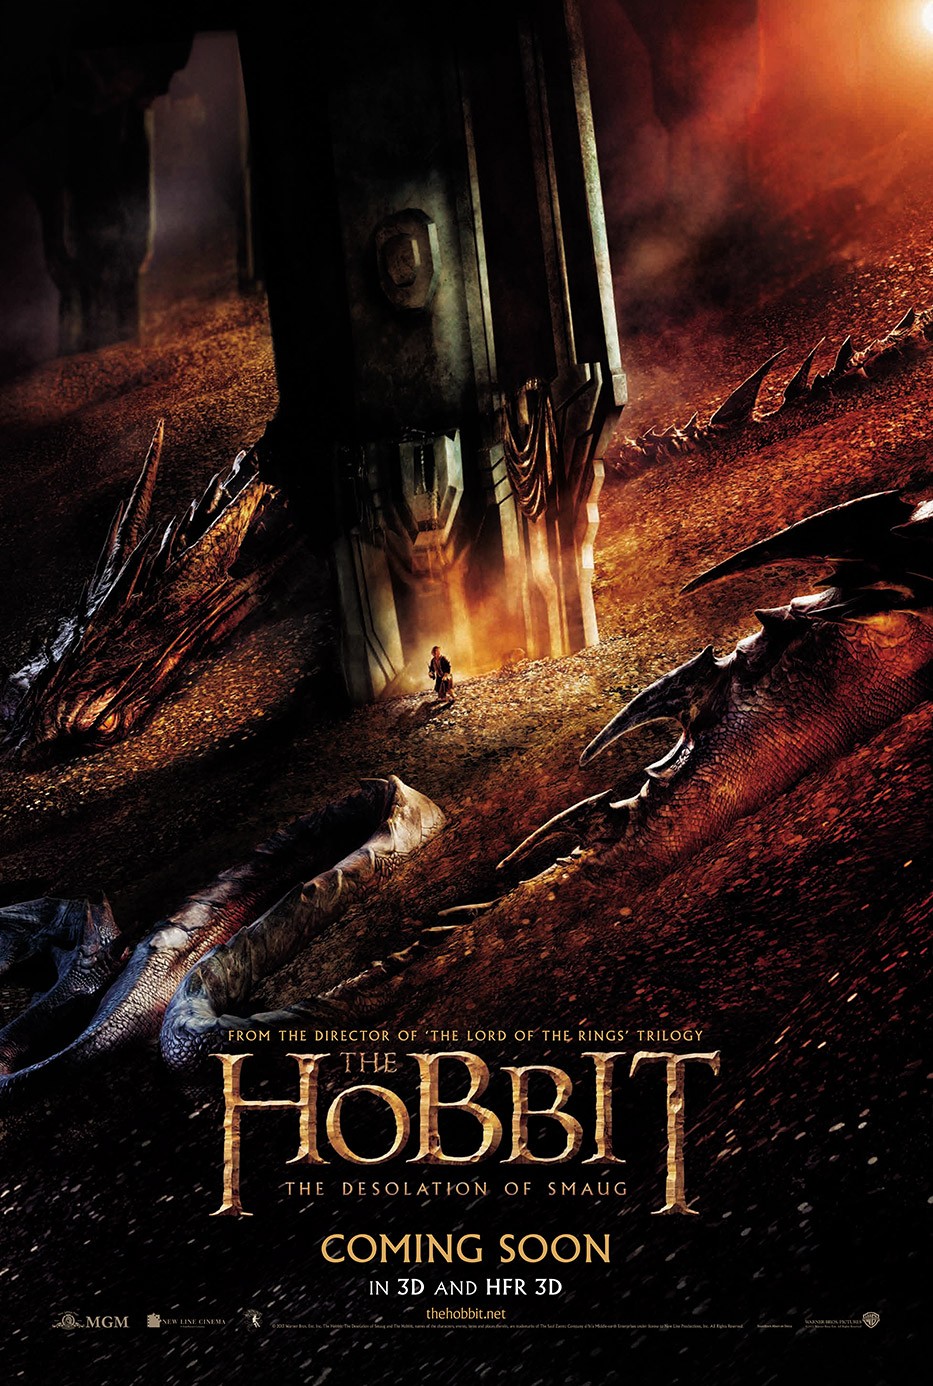 download the new version for apple The Hobbit: The Desolation of Smaug